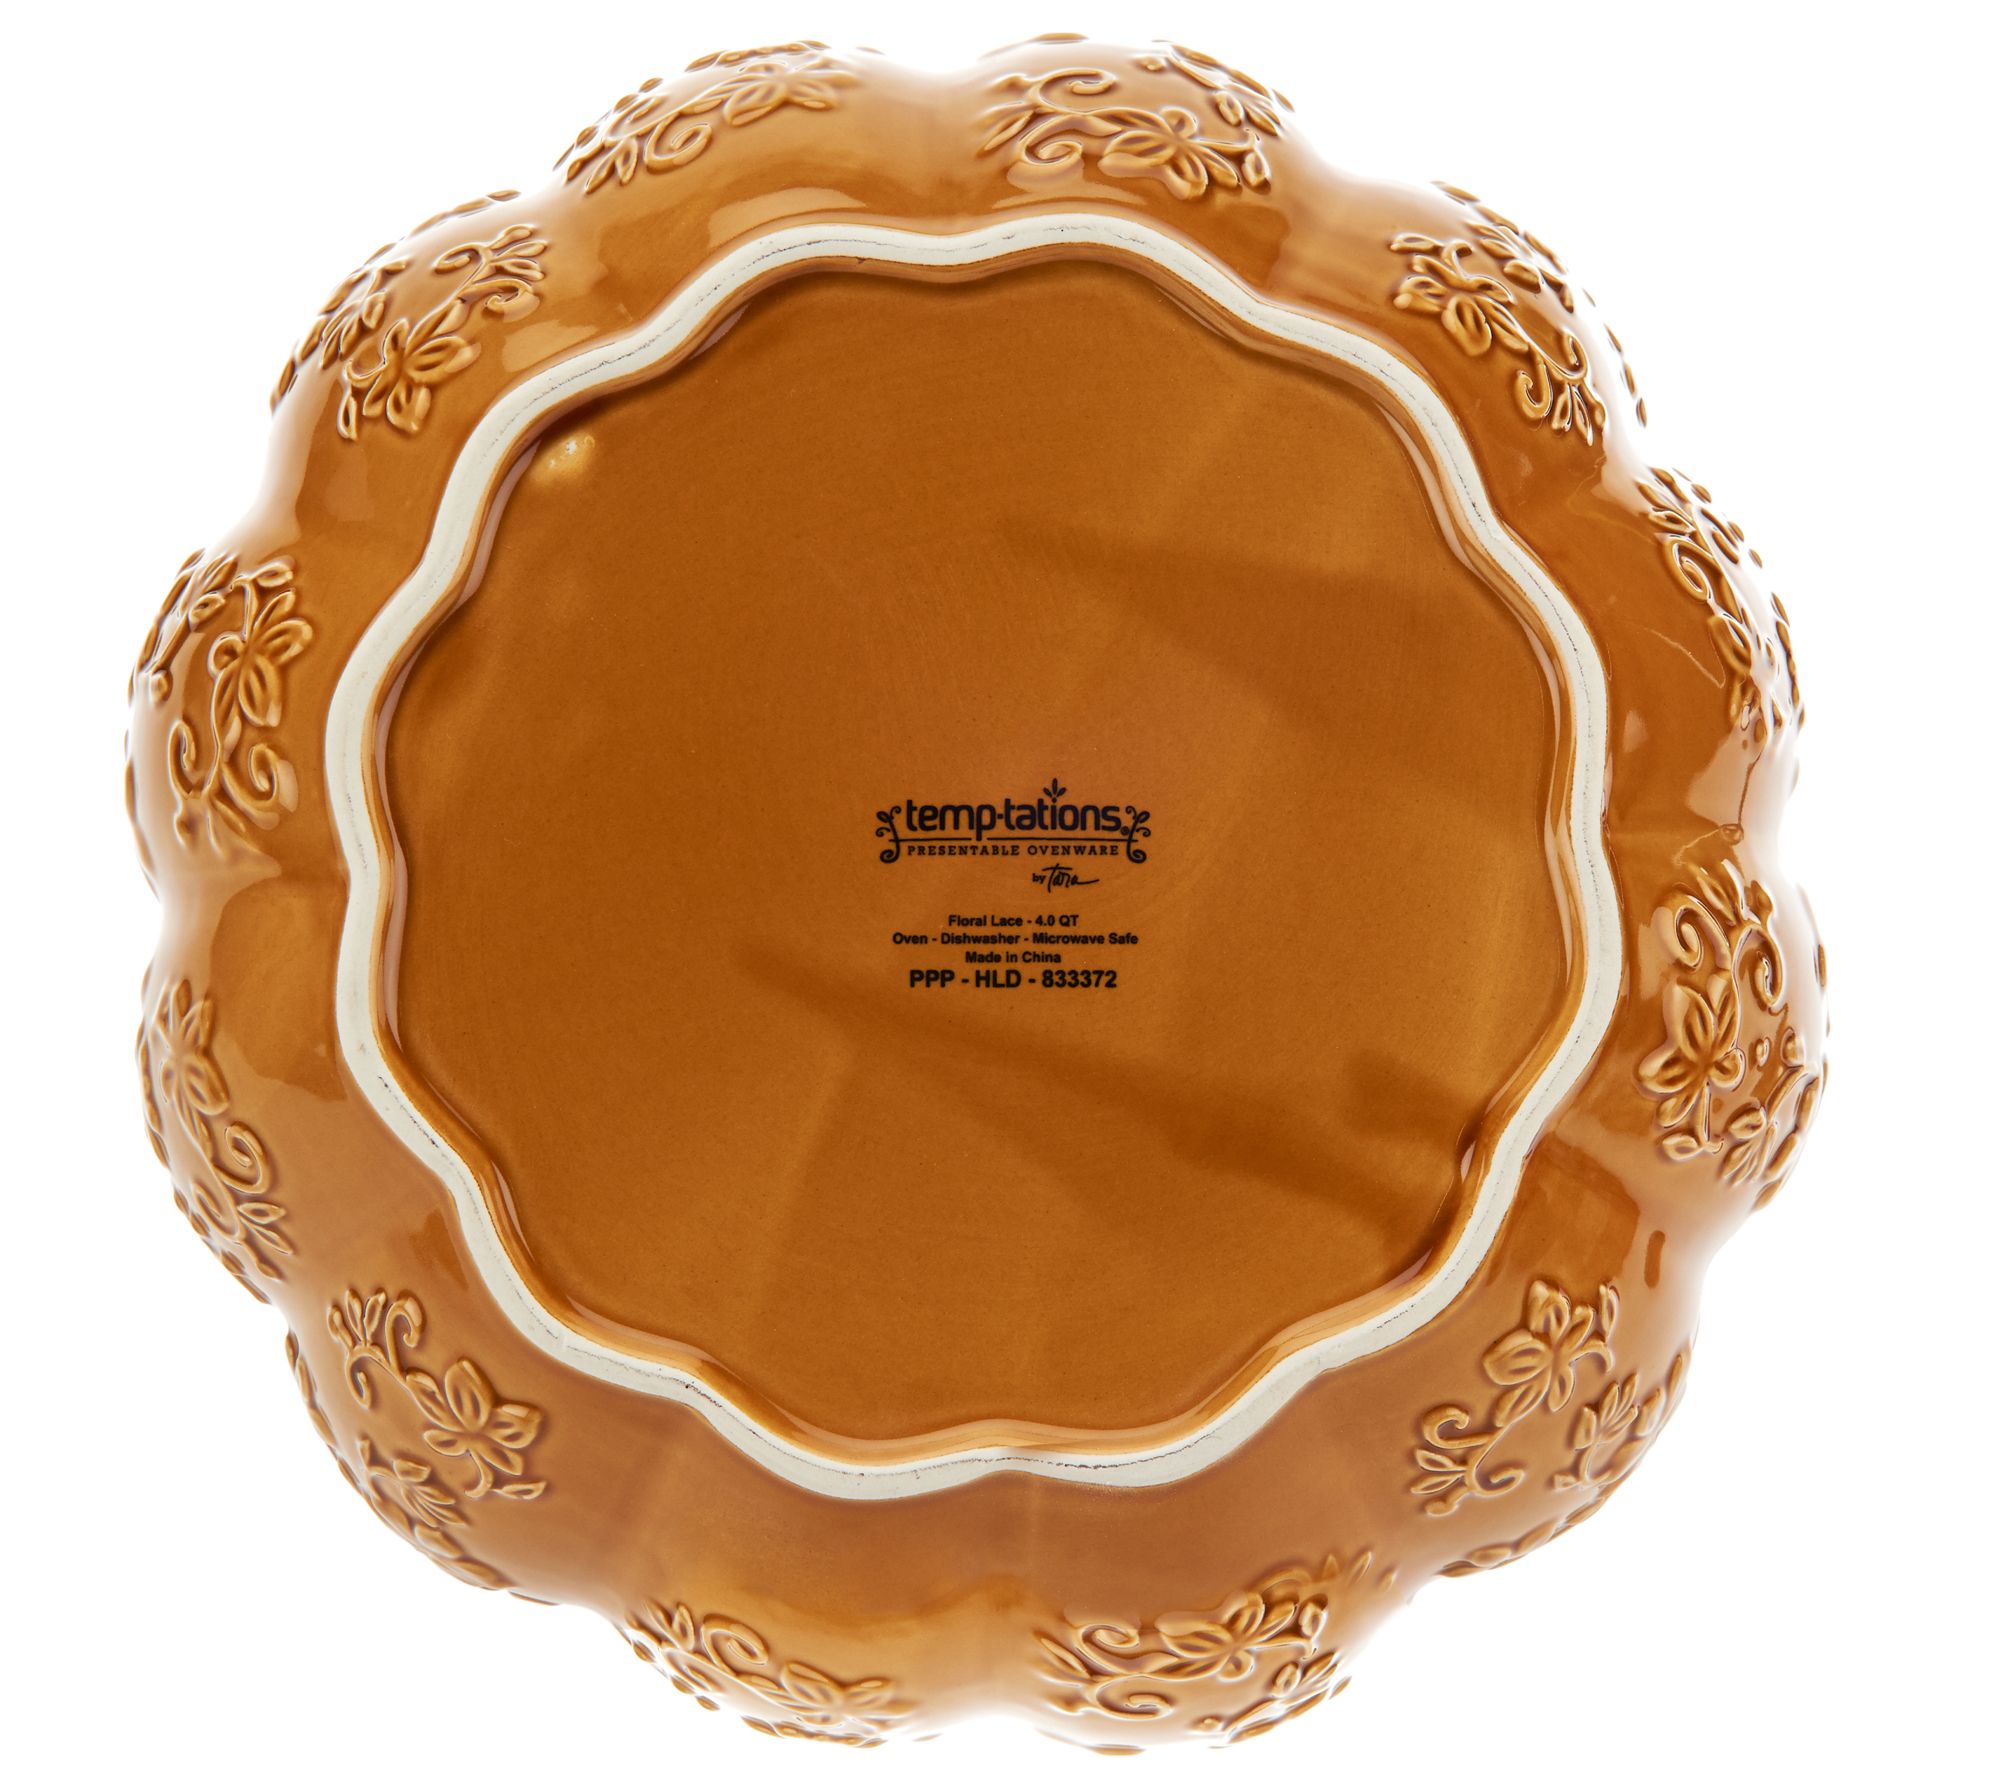 Temp-tations 4 qt Soup Tureen with Lid Floral Lace Amber Embossed Pumpkin,